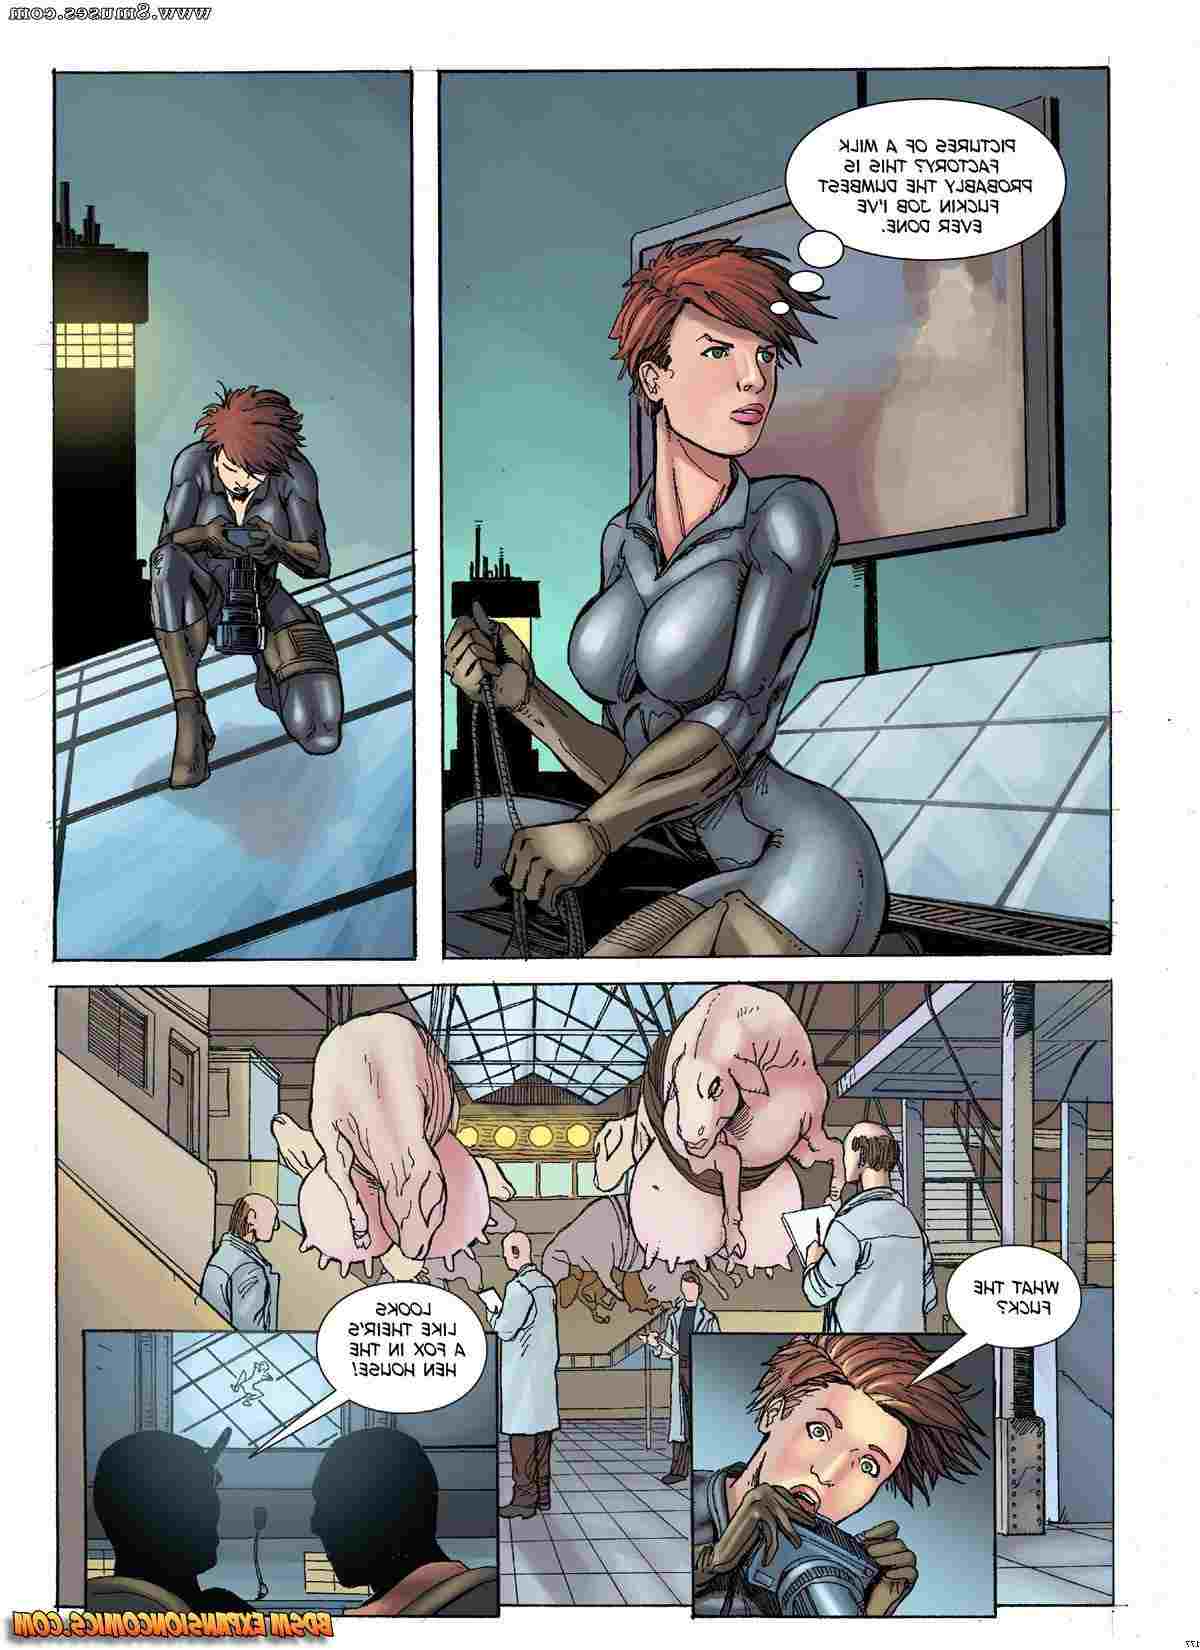 Expansion-Comics/The-Janitor The_Janitor__8muses_-_Sex_and_Porn_Comics_2.jpg